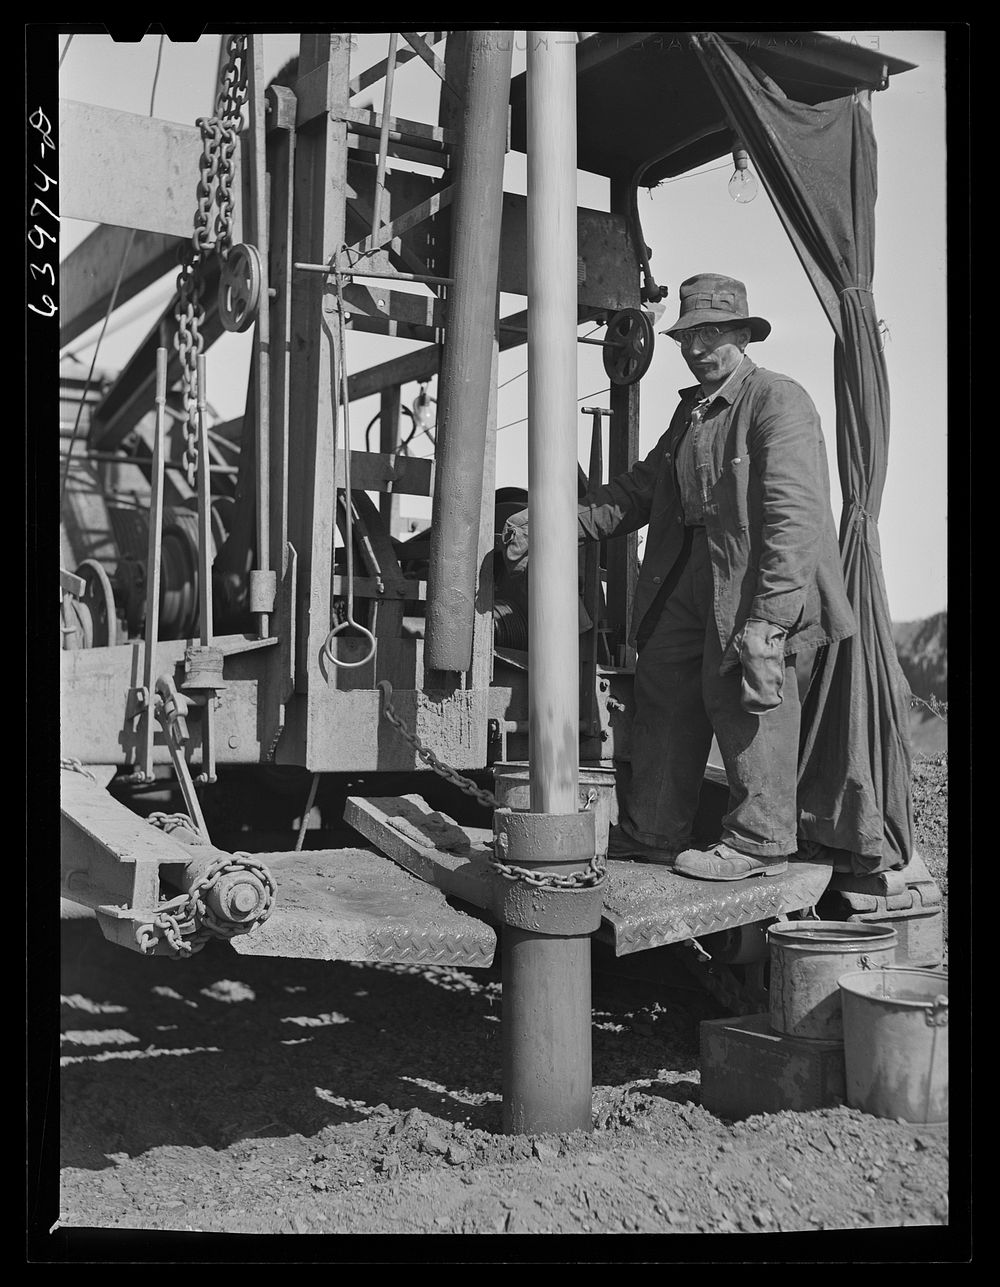 Vertical drill boring hole for blasting, Mahoning pit. Hibbing, Minnesota. Sourced from the Library of Congress.